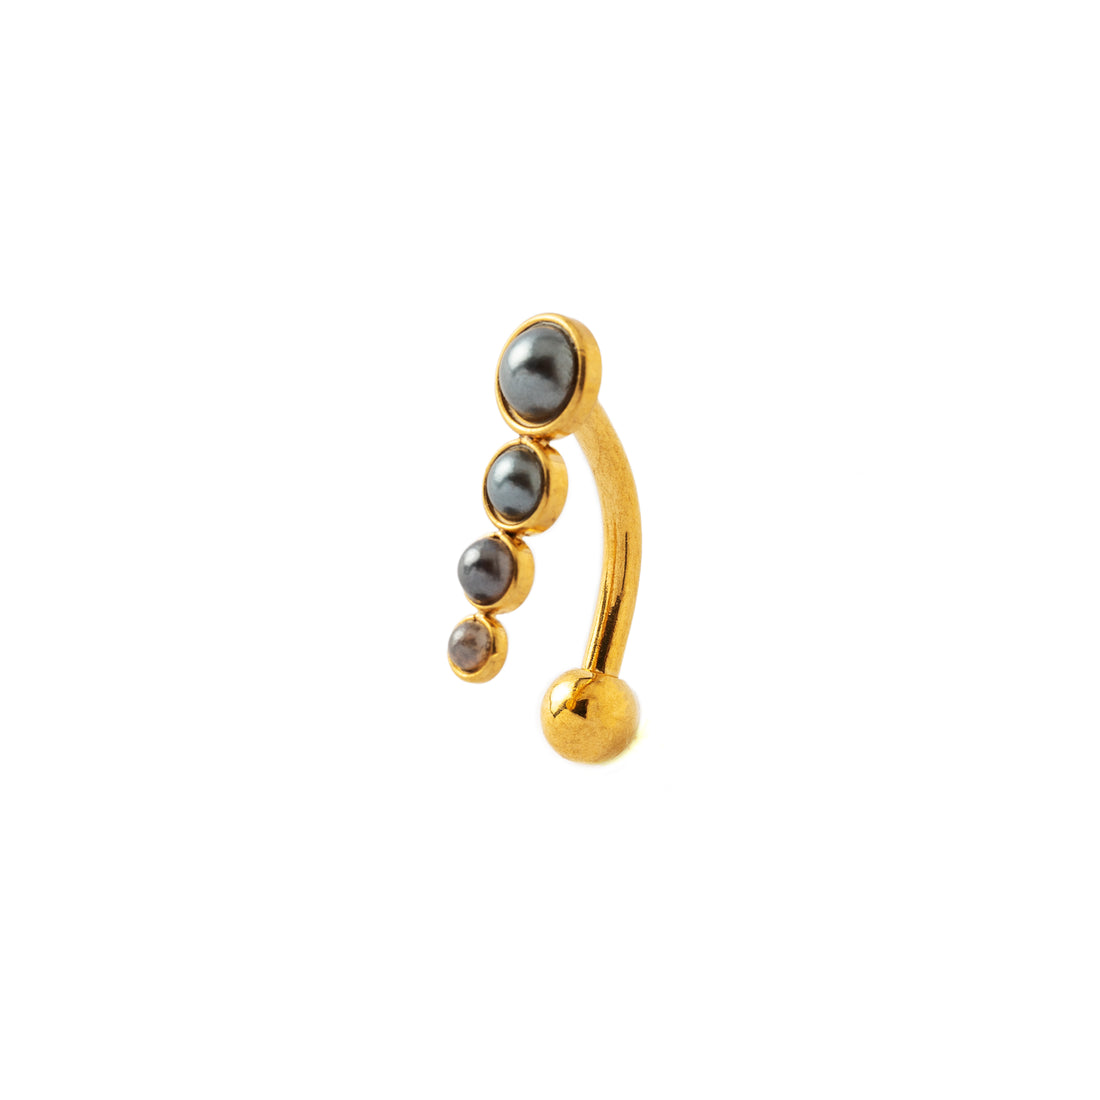 Newton Golden Navel Piercing with Pearls right side view